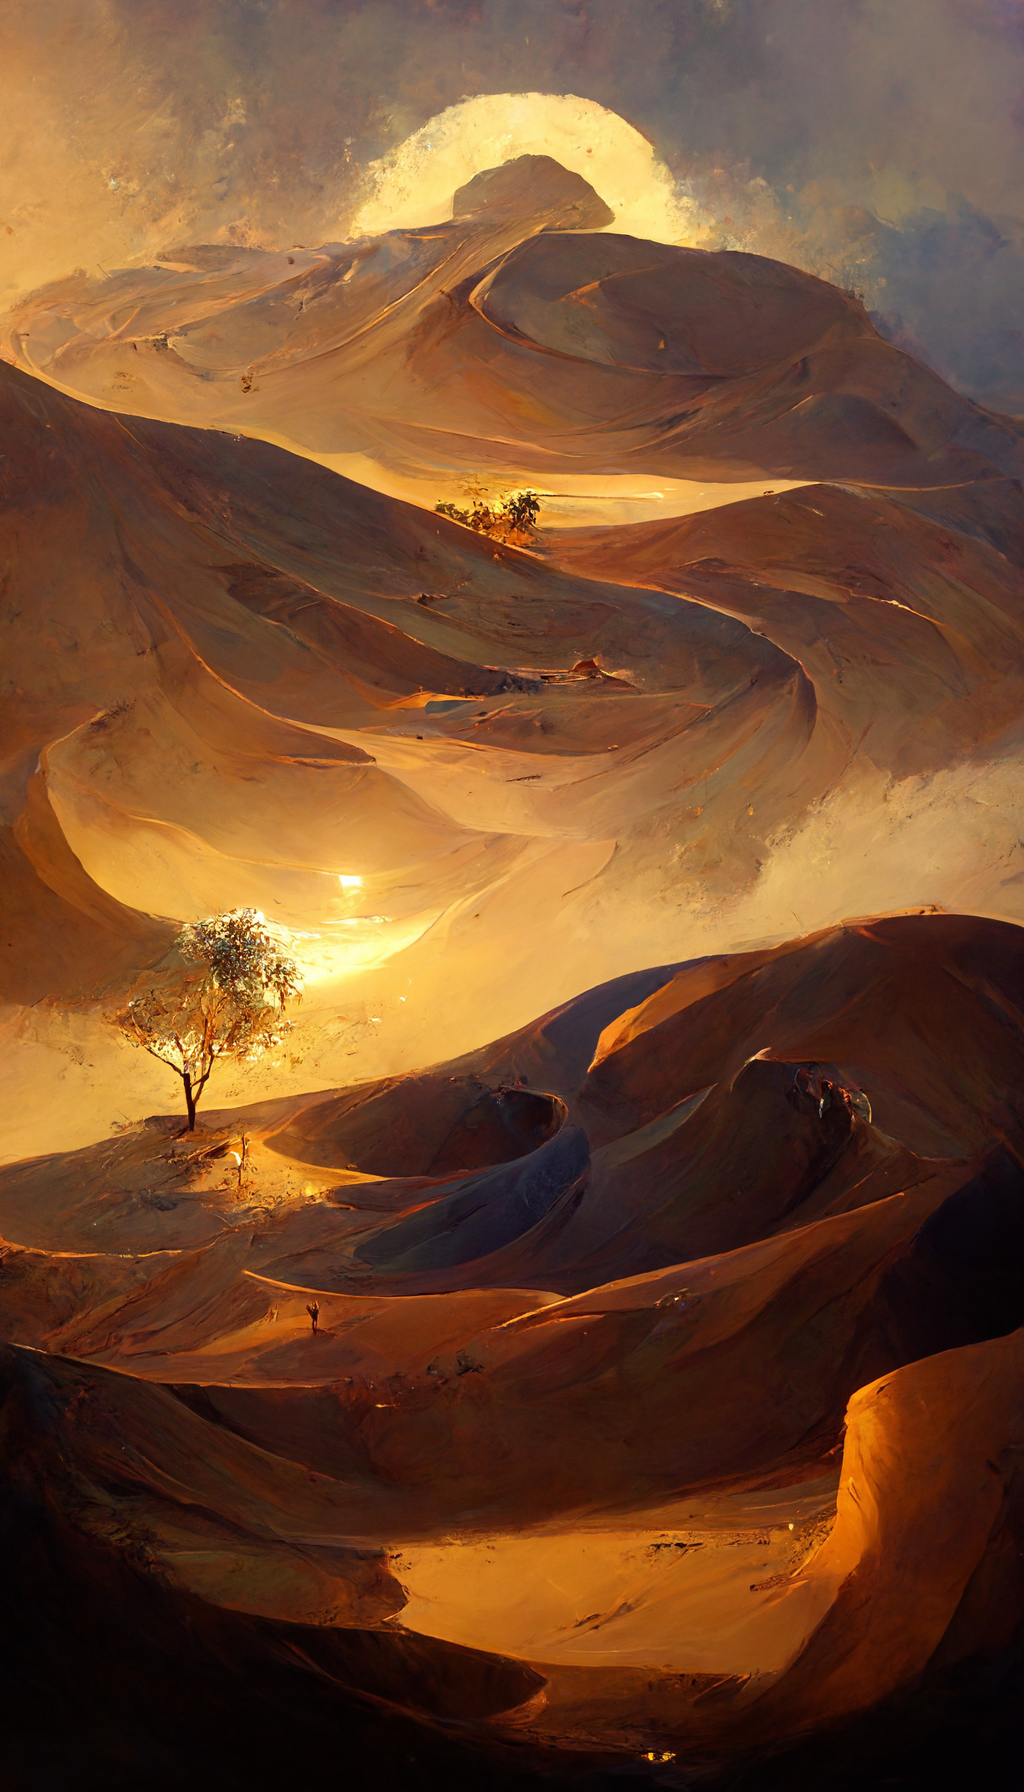 Shifting golden sand dunes with a setting sun and a small scrubby tree.